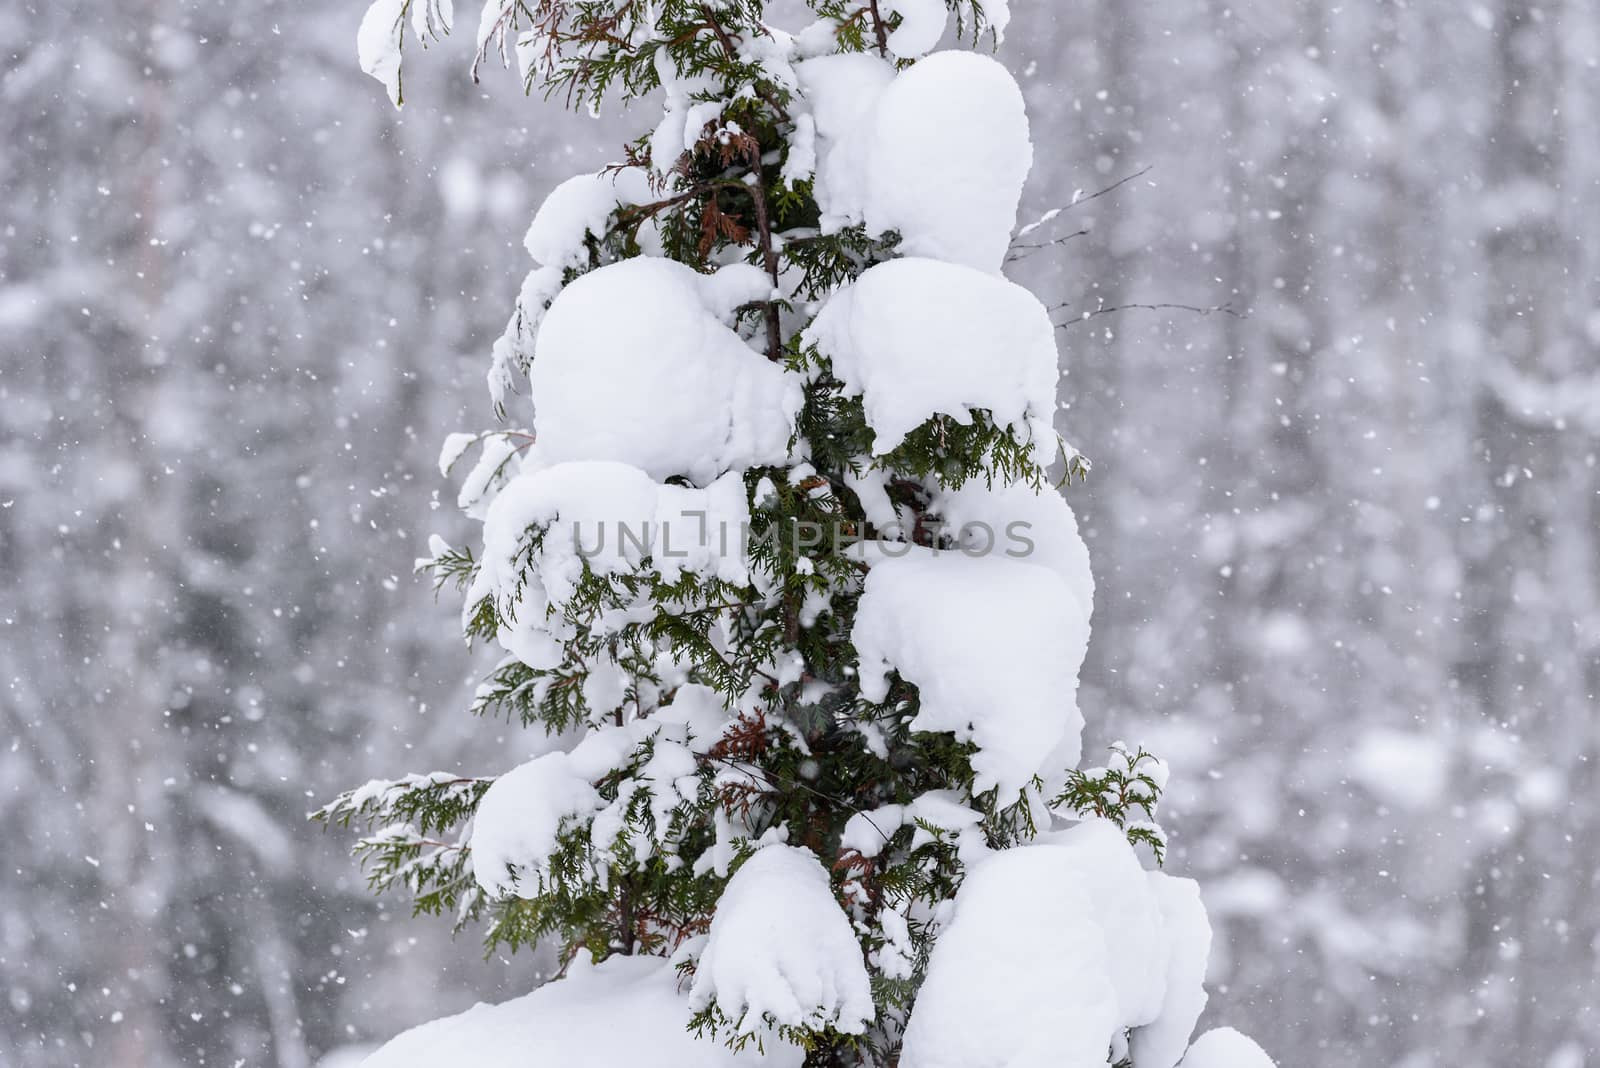 The tree has covered with heavy snow in winter season at Lapland by animagesdesign